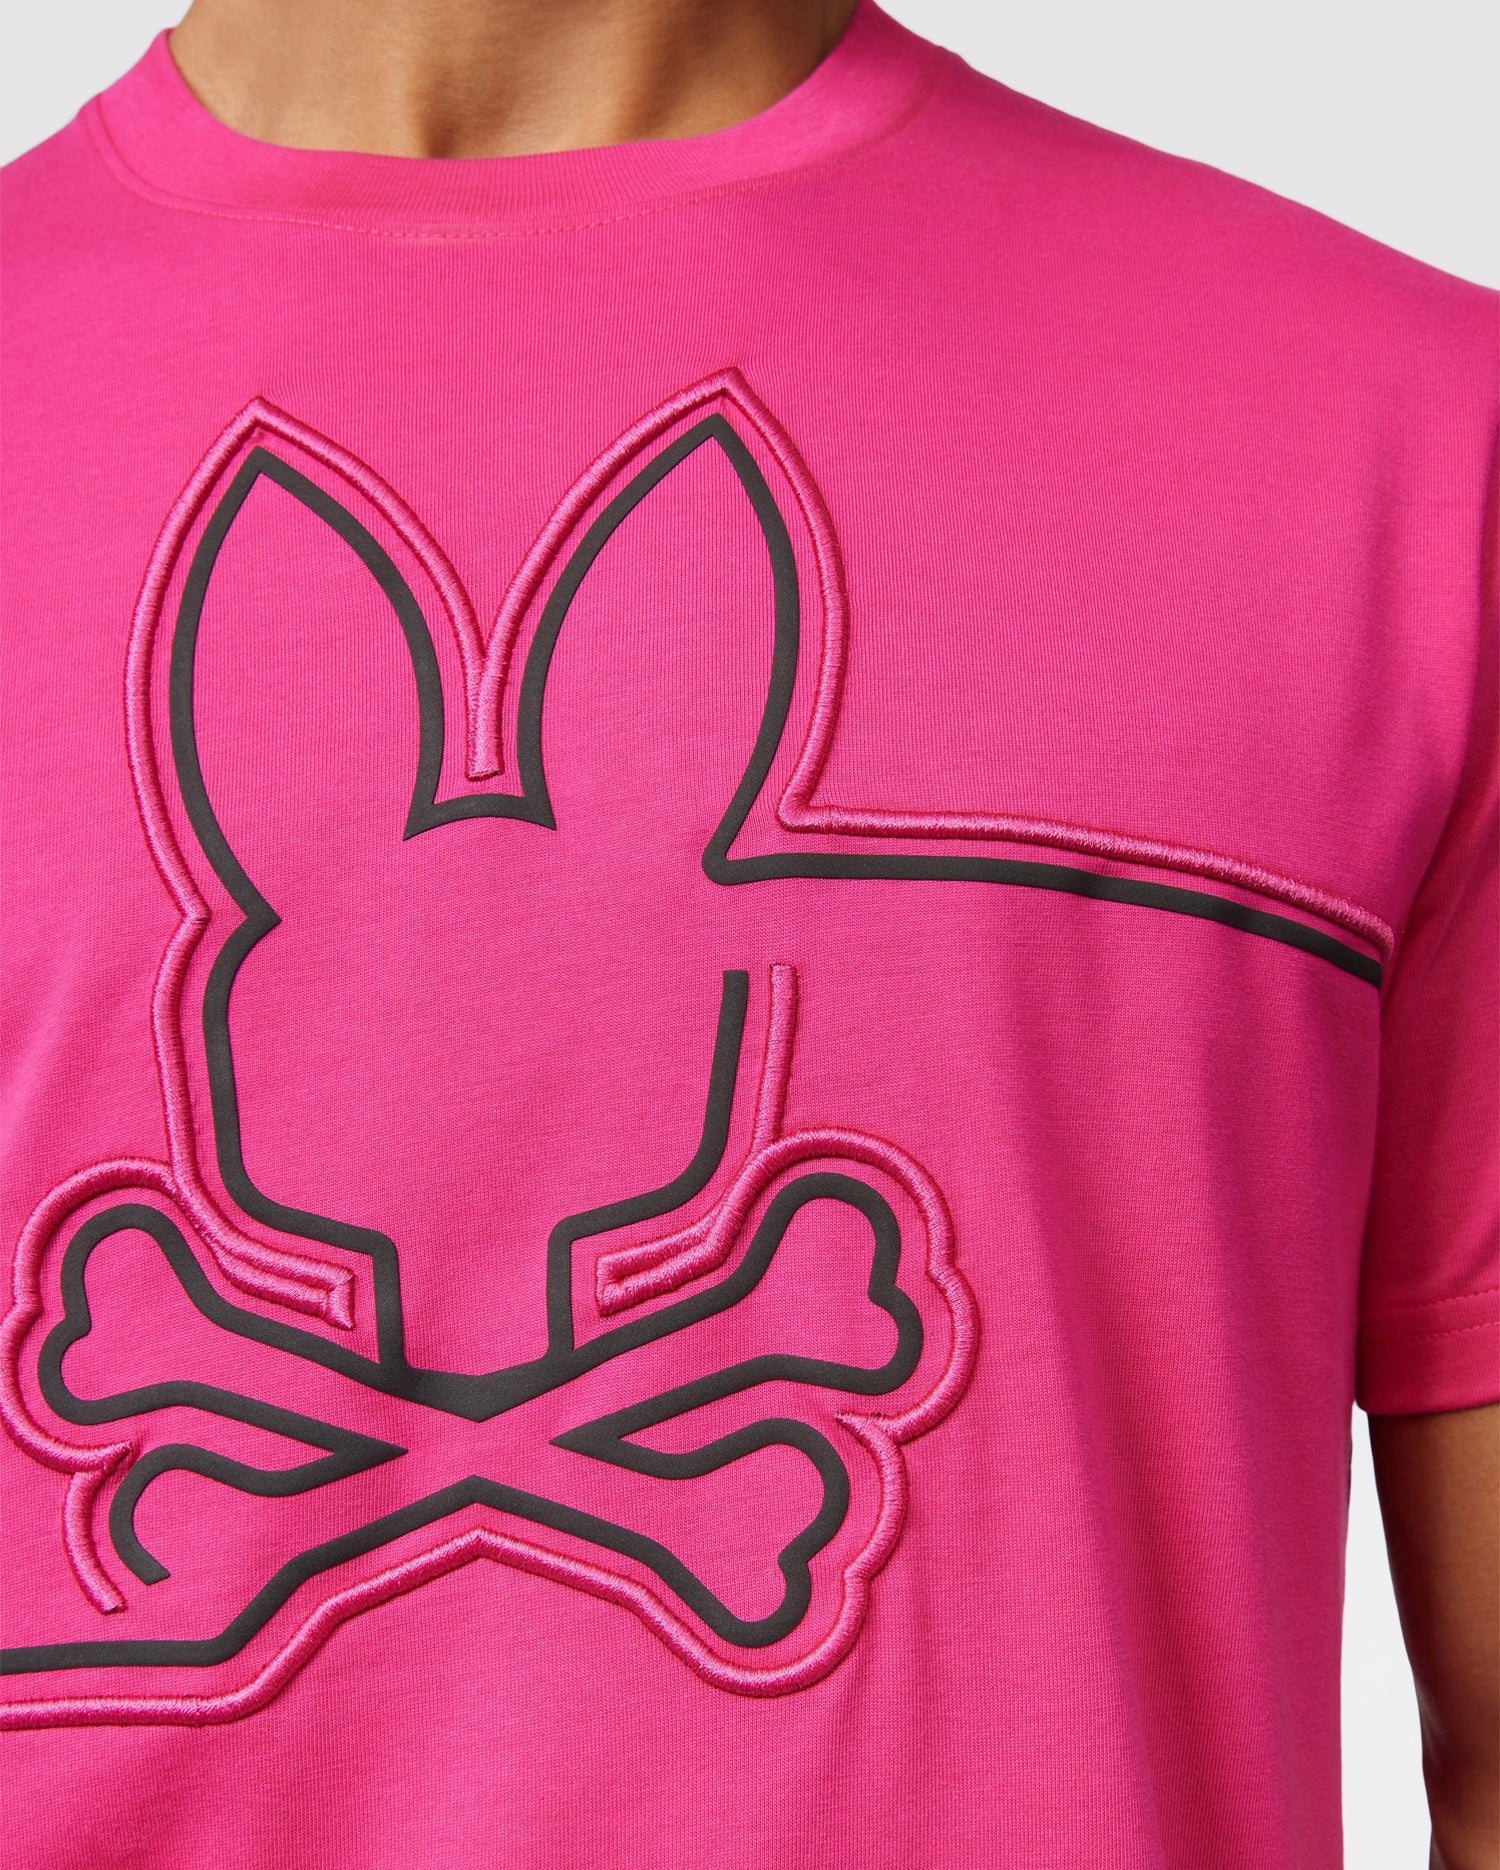 Sports City Chicago | Tee Bunny Graphic Chester Embroidered Psycho